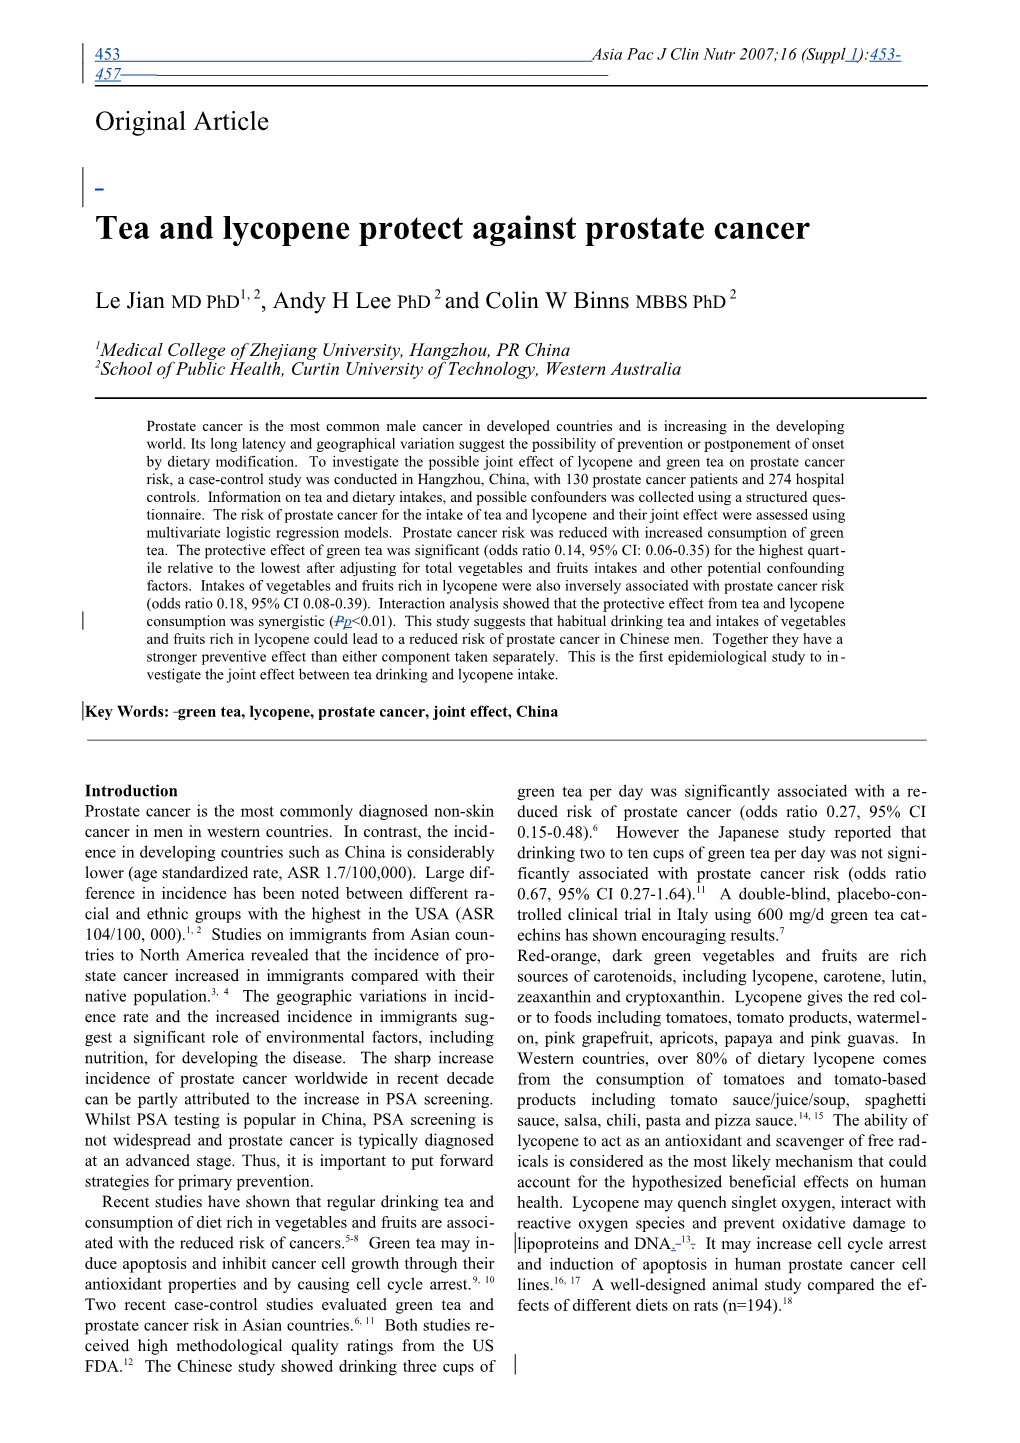 Tea and Lycopene Protect Against Prostate Cancer